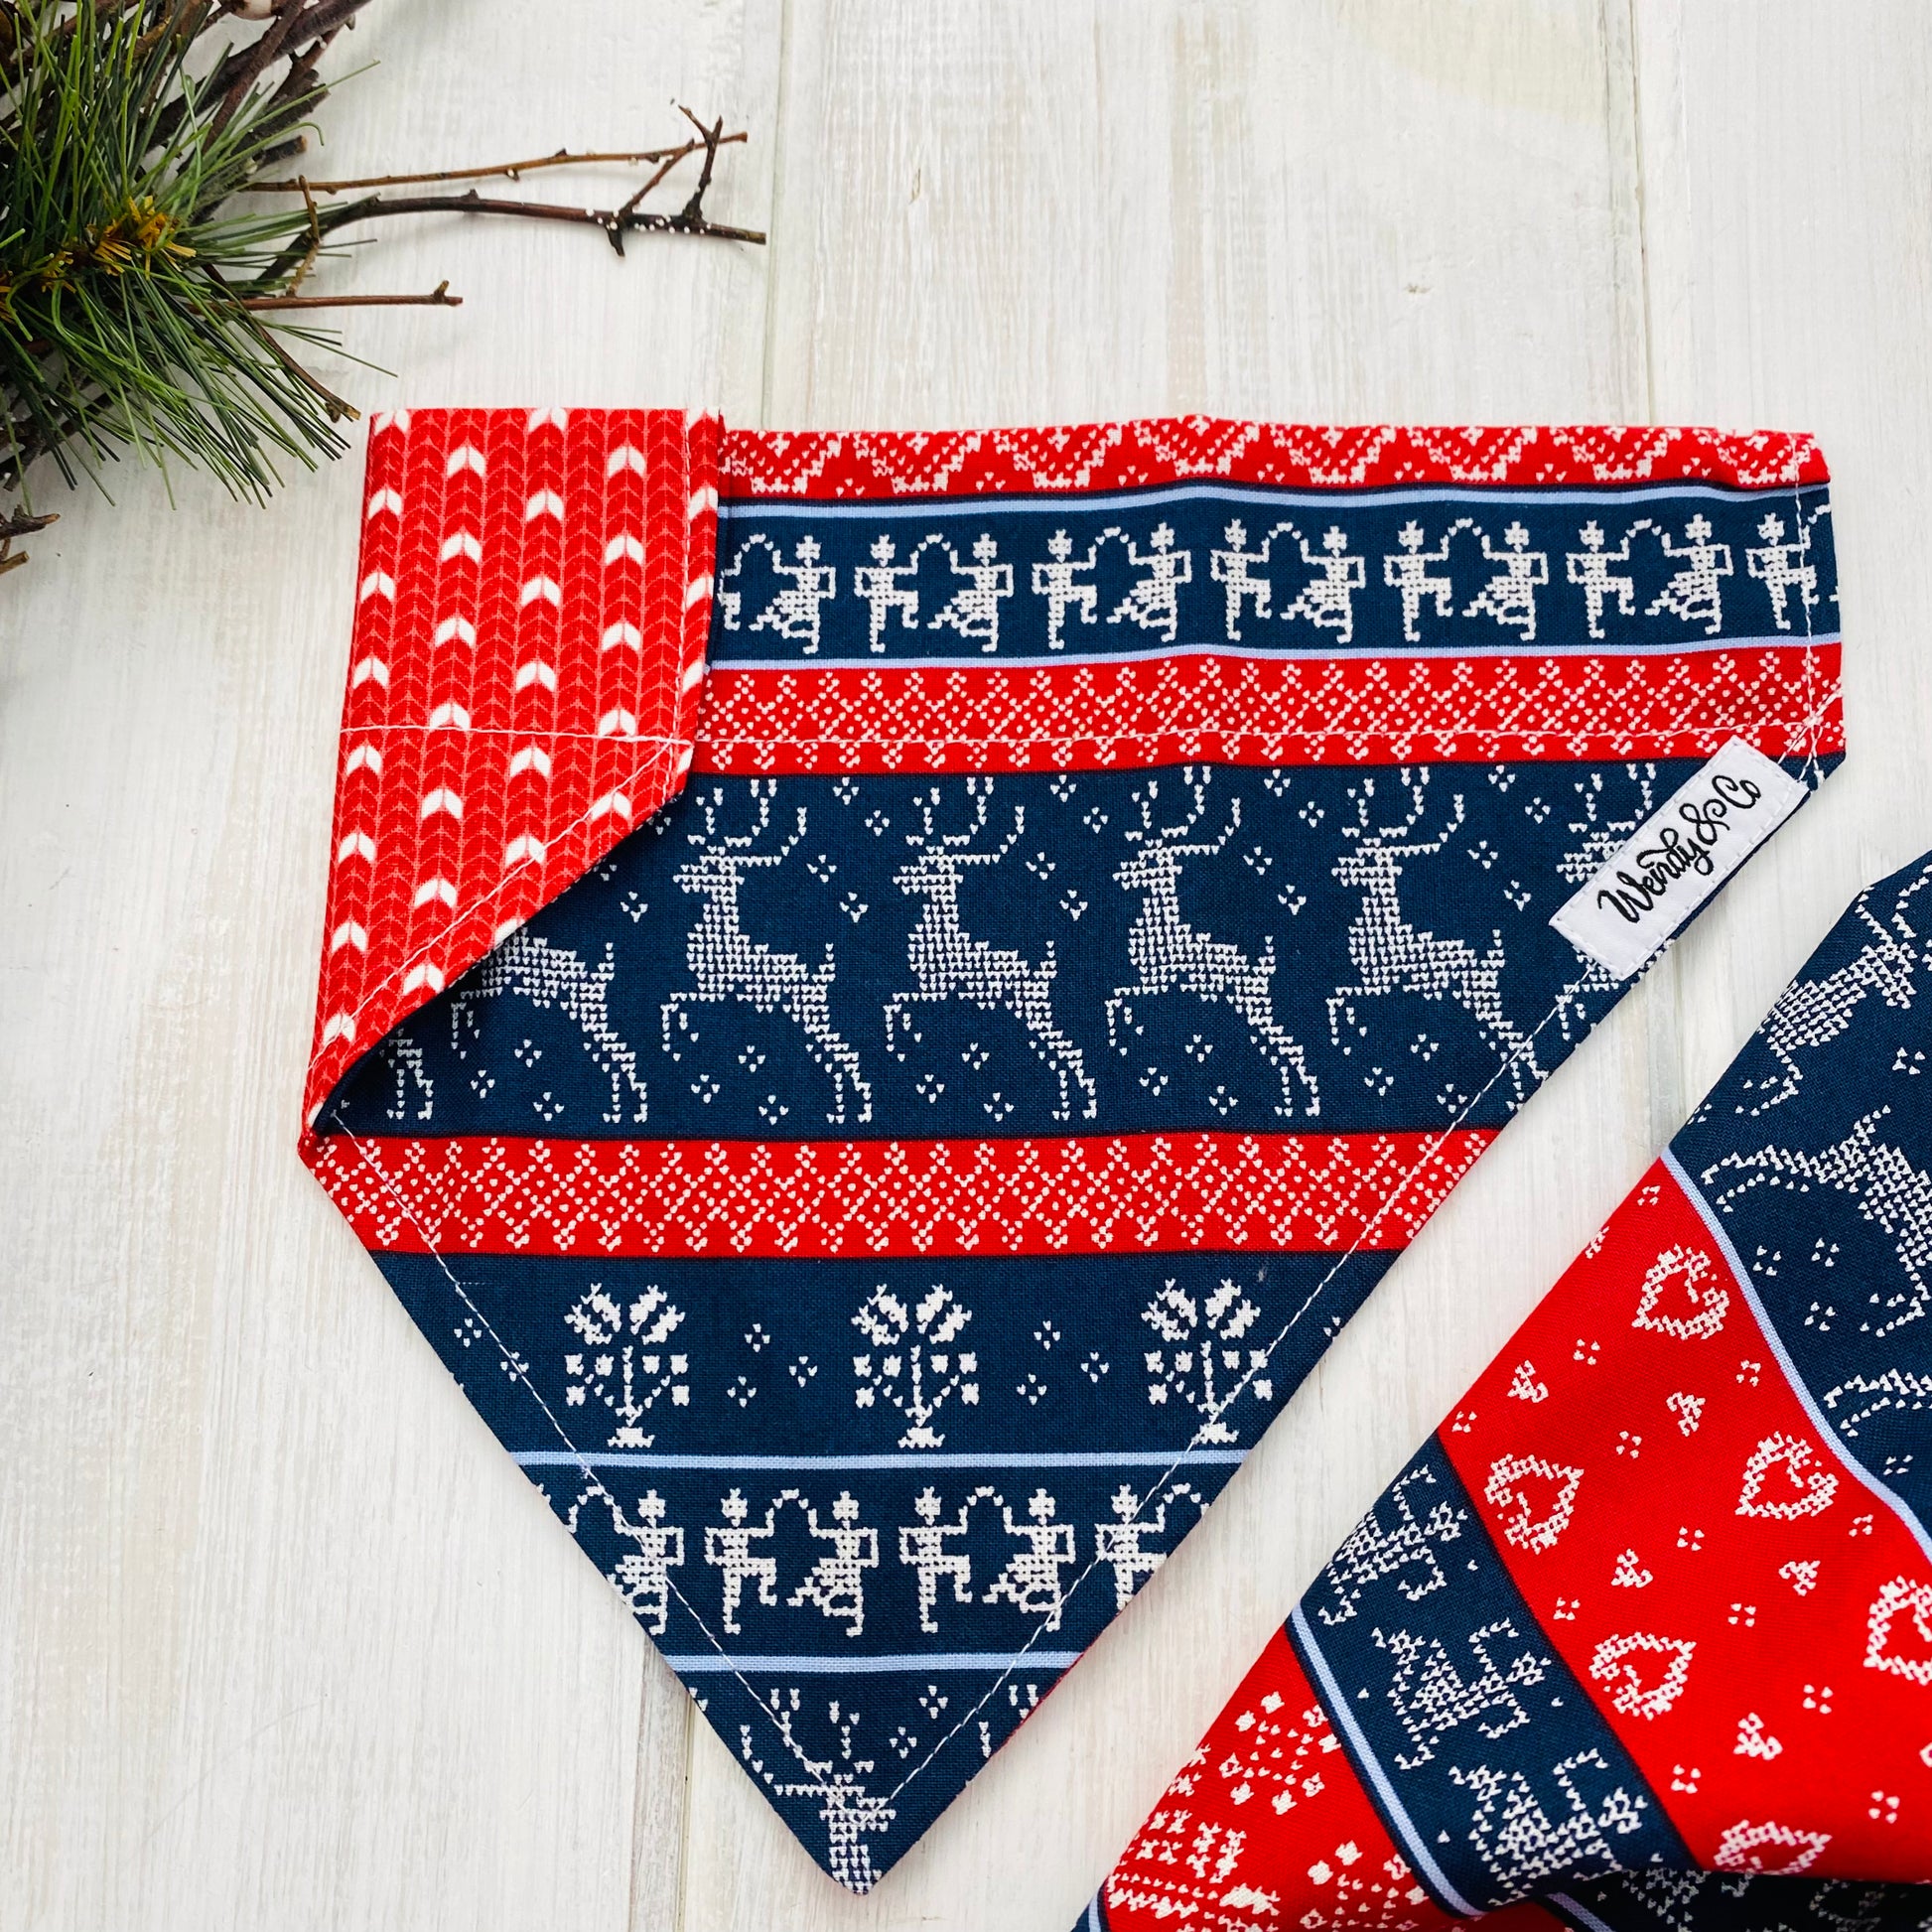 Celebrate winter with this Nordic style print with rows of stitched deer, and florals. Shown with red sweater reverse.